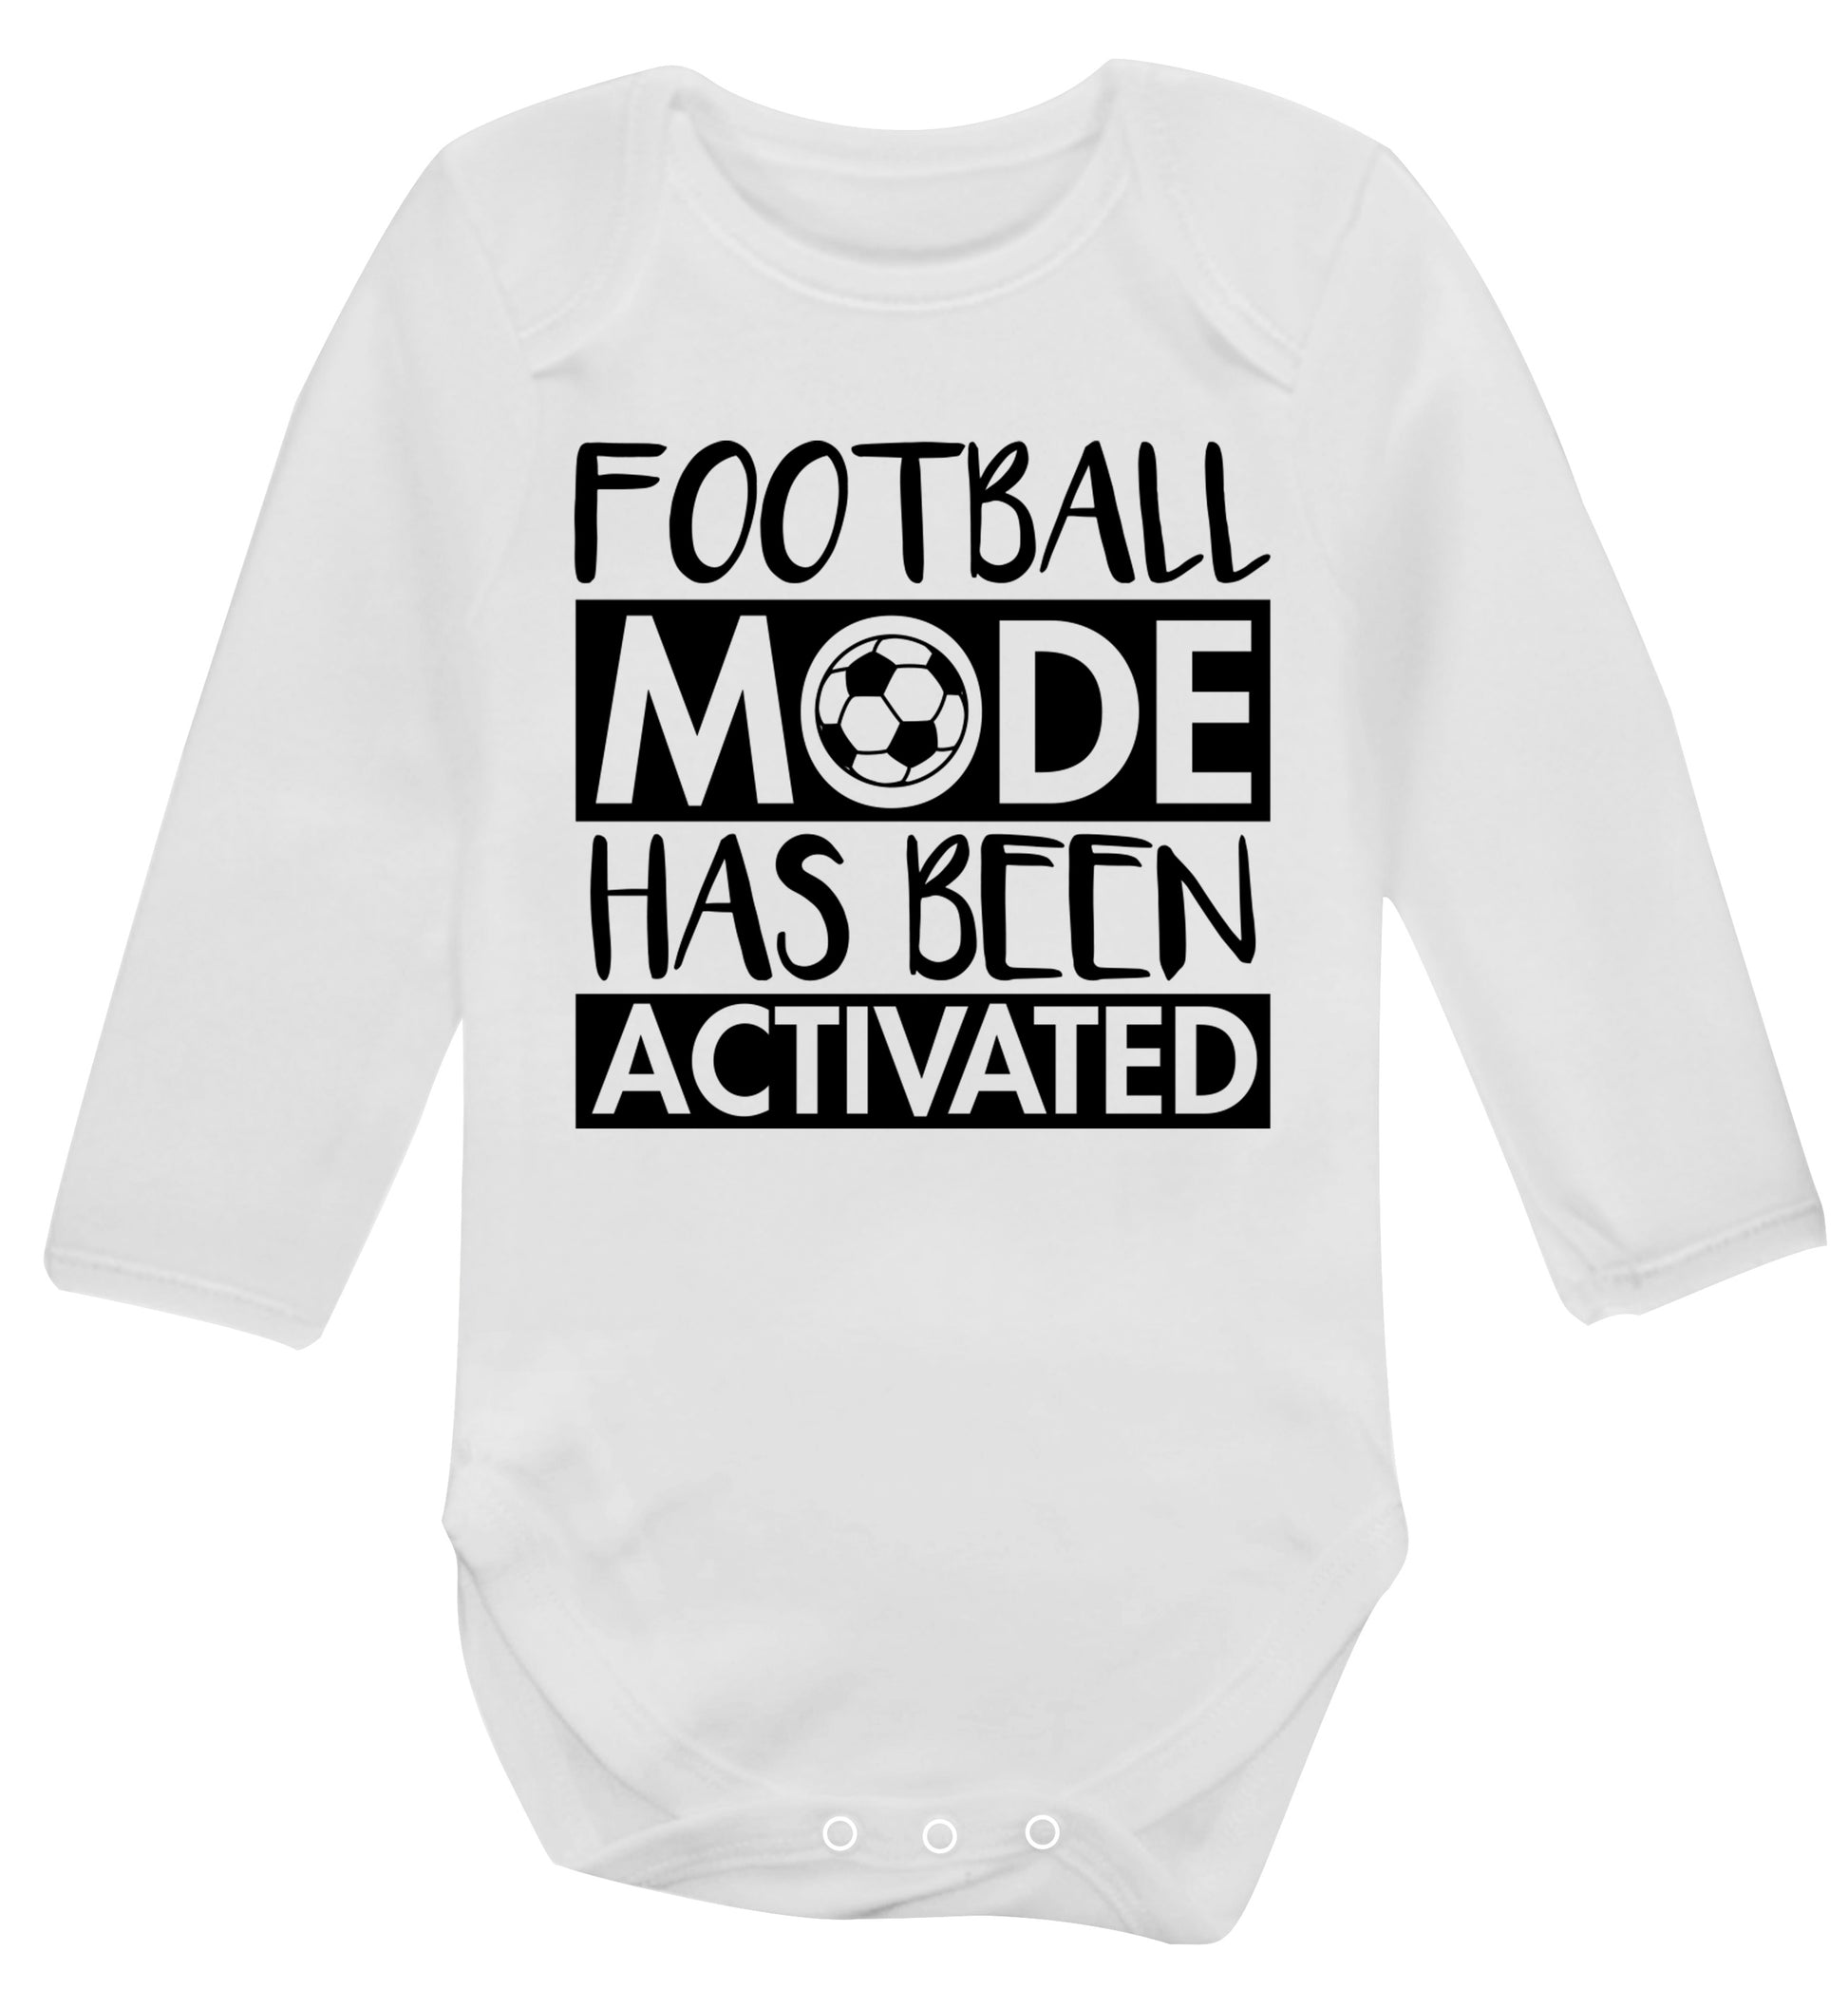 Football mode has been activated Baby Vest long sleeved white 6-12 months